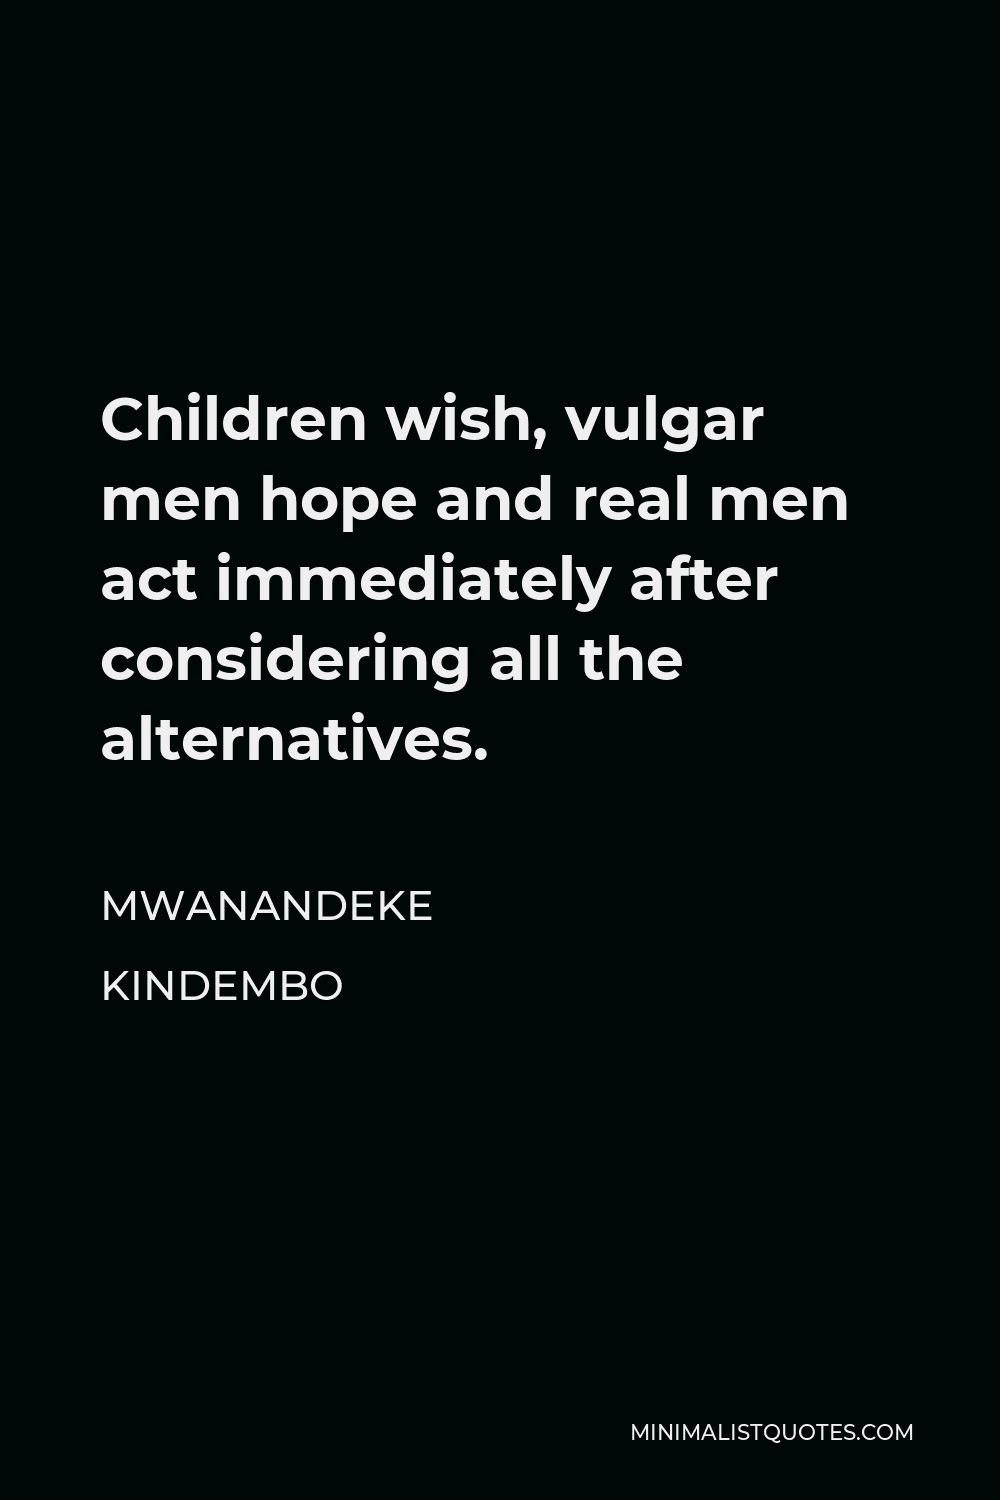 Mwanandeke Kindembo Quote - Children wish, vulgar men hope and real men act immediately after considering all the alternatives.